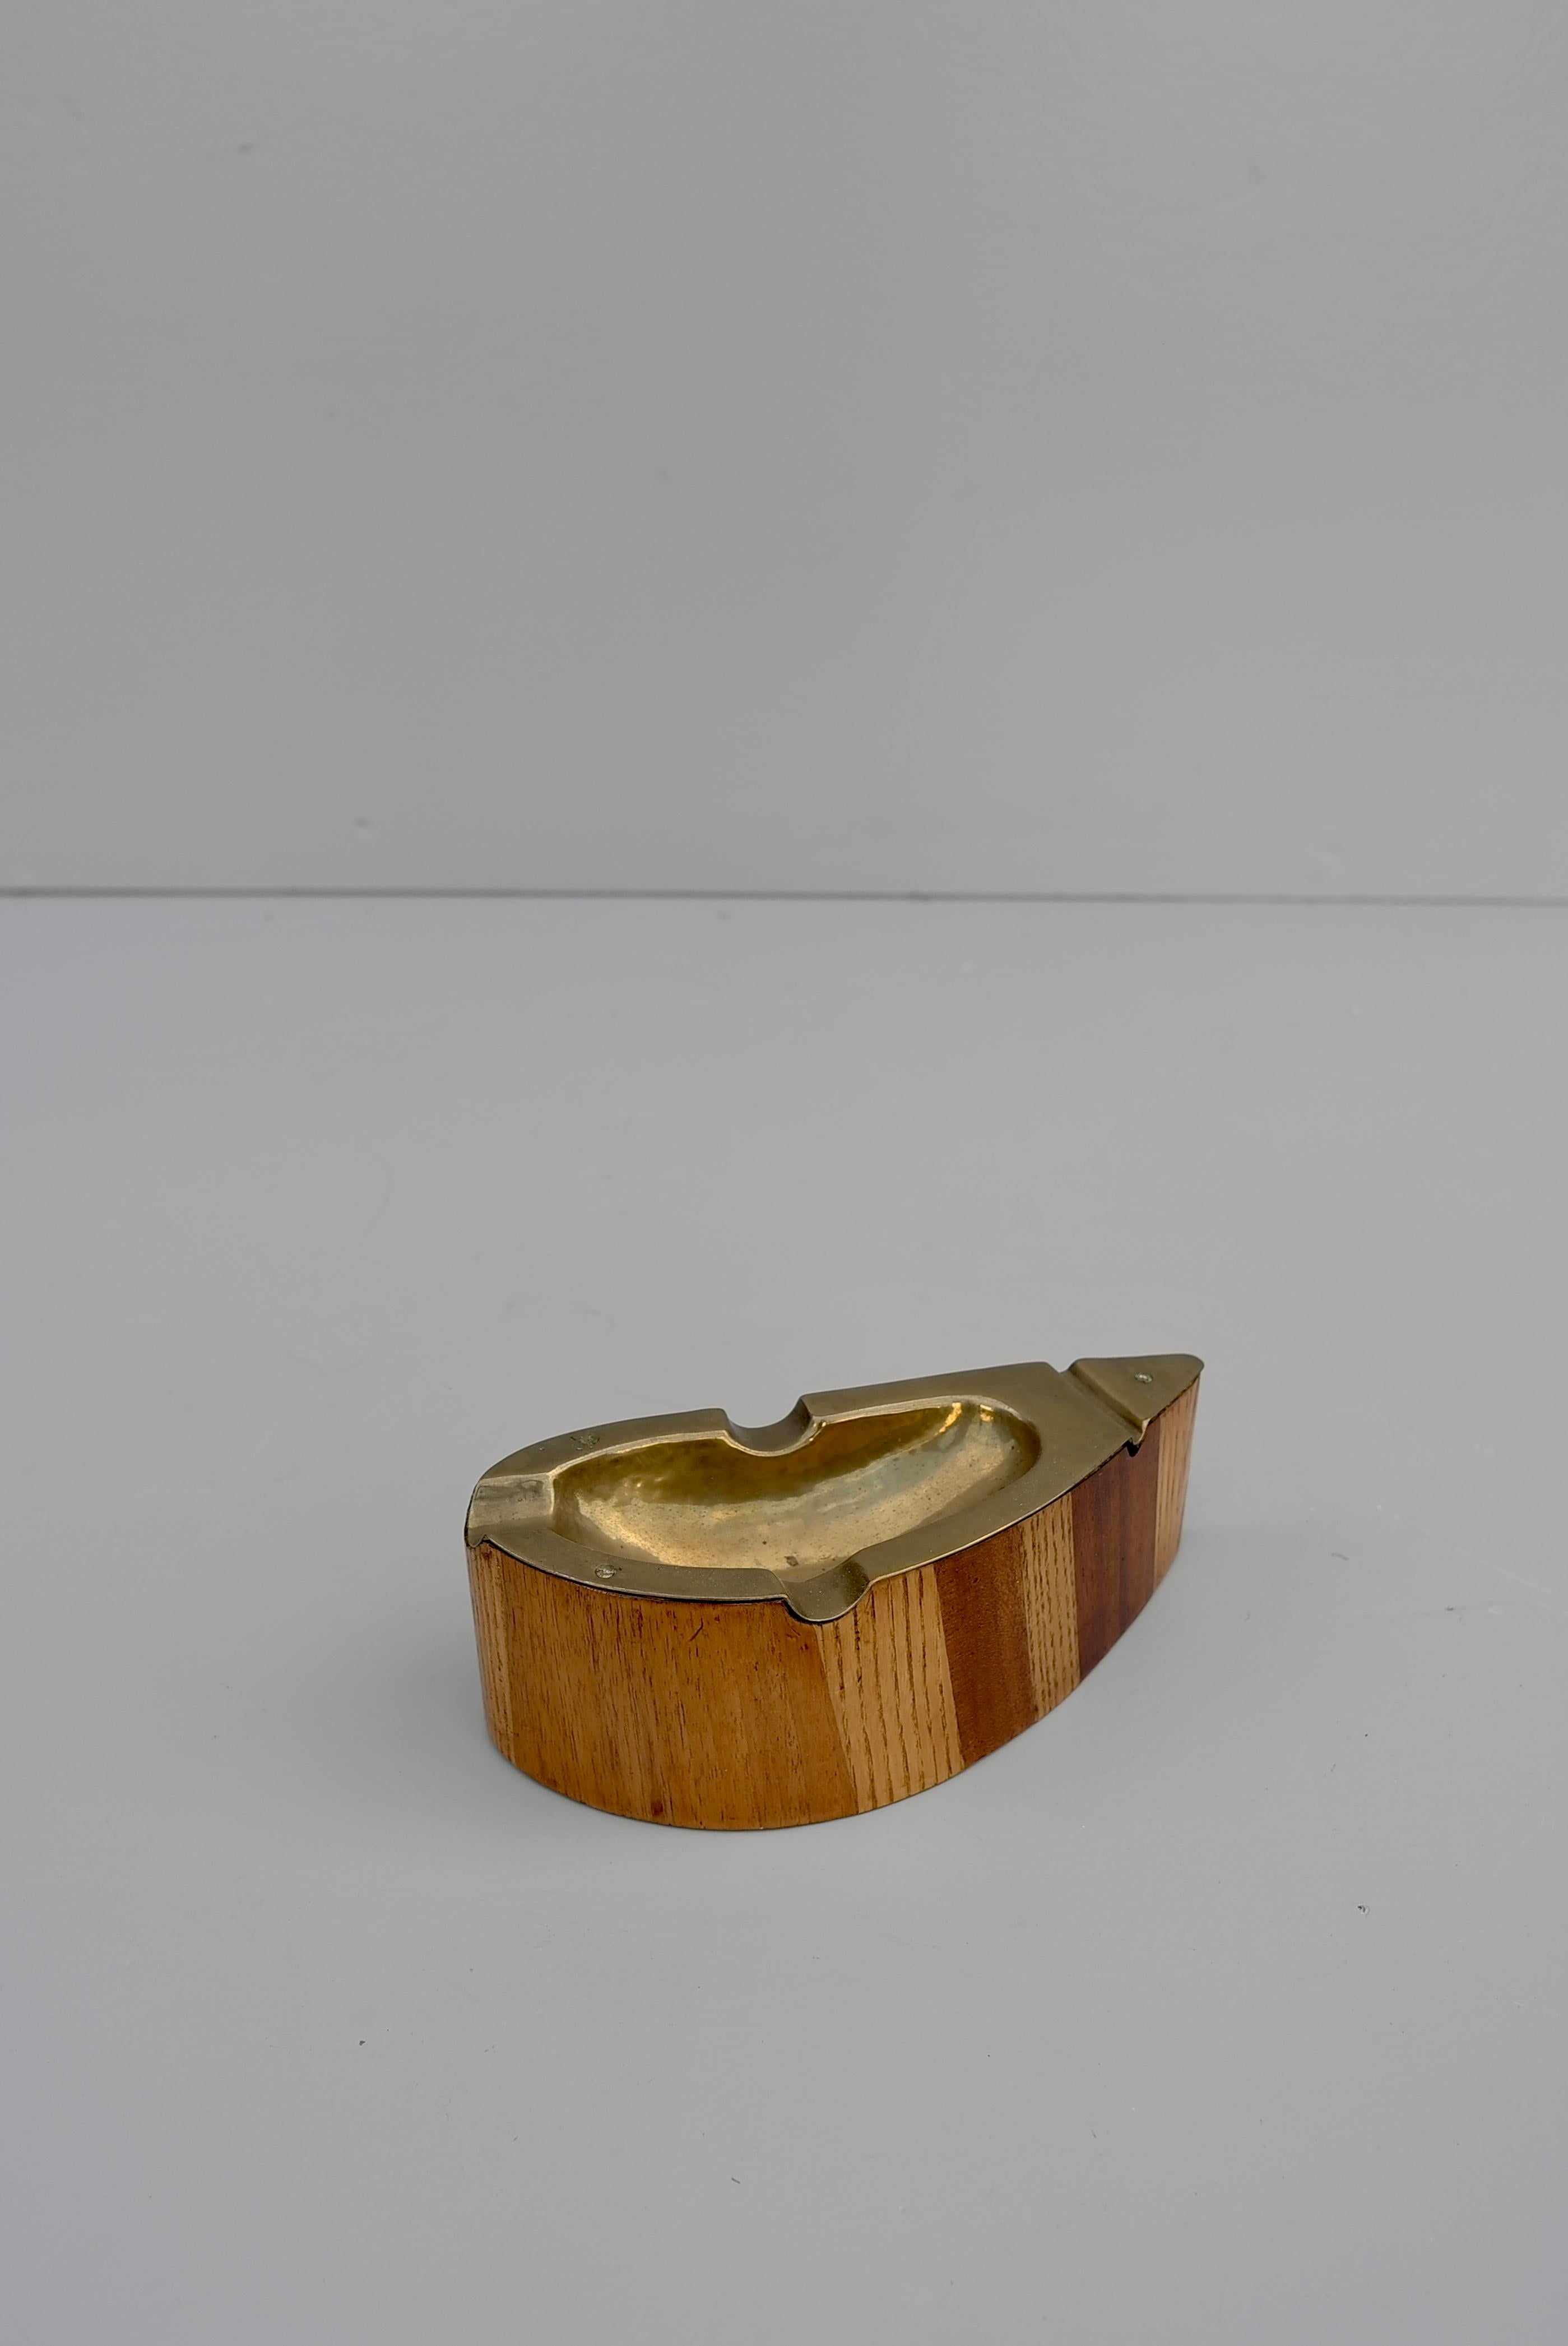 Mid-Century Modern Ashtray Teardrop model in Brass and Wood, Austria 1950's For Sale